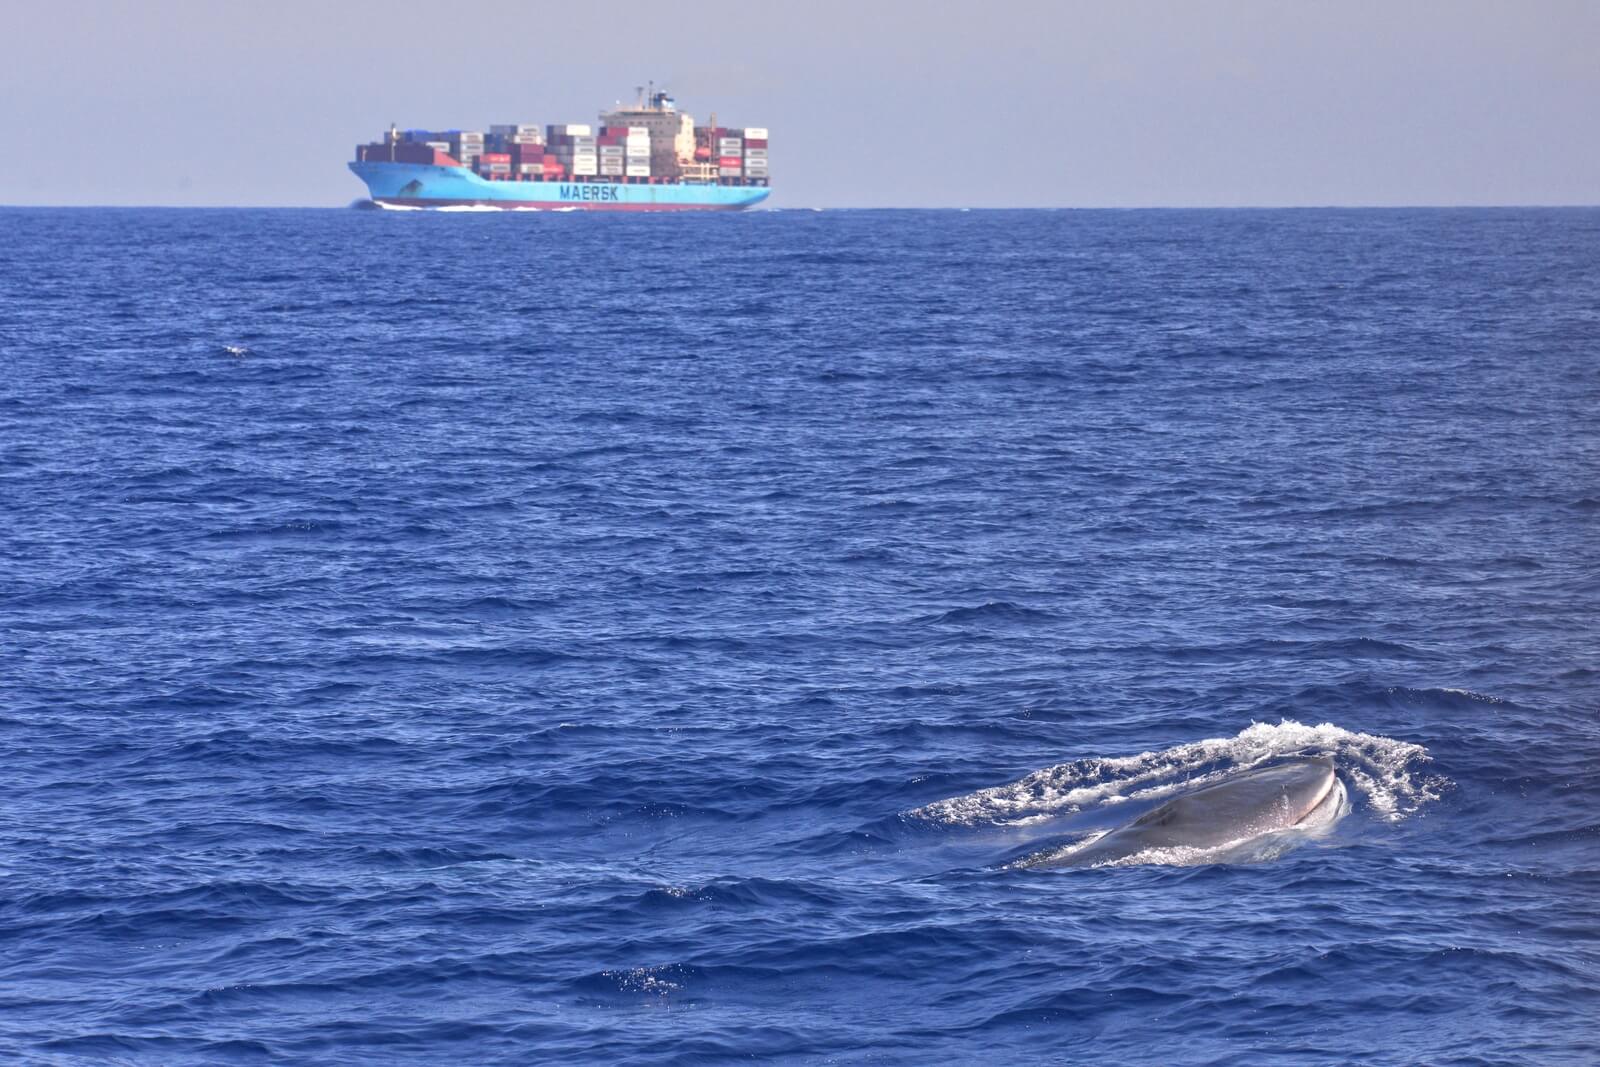 Fin whale (Balaenoptera physalus) swimming with a shipping container in the background.